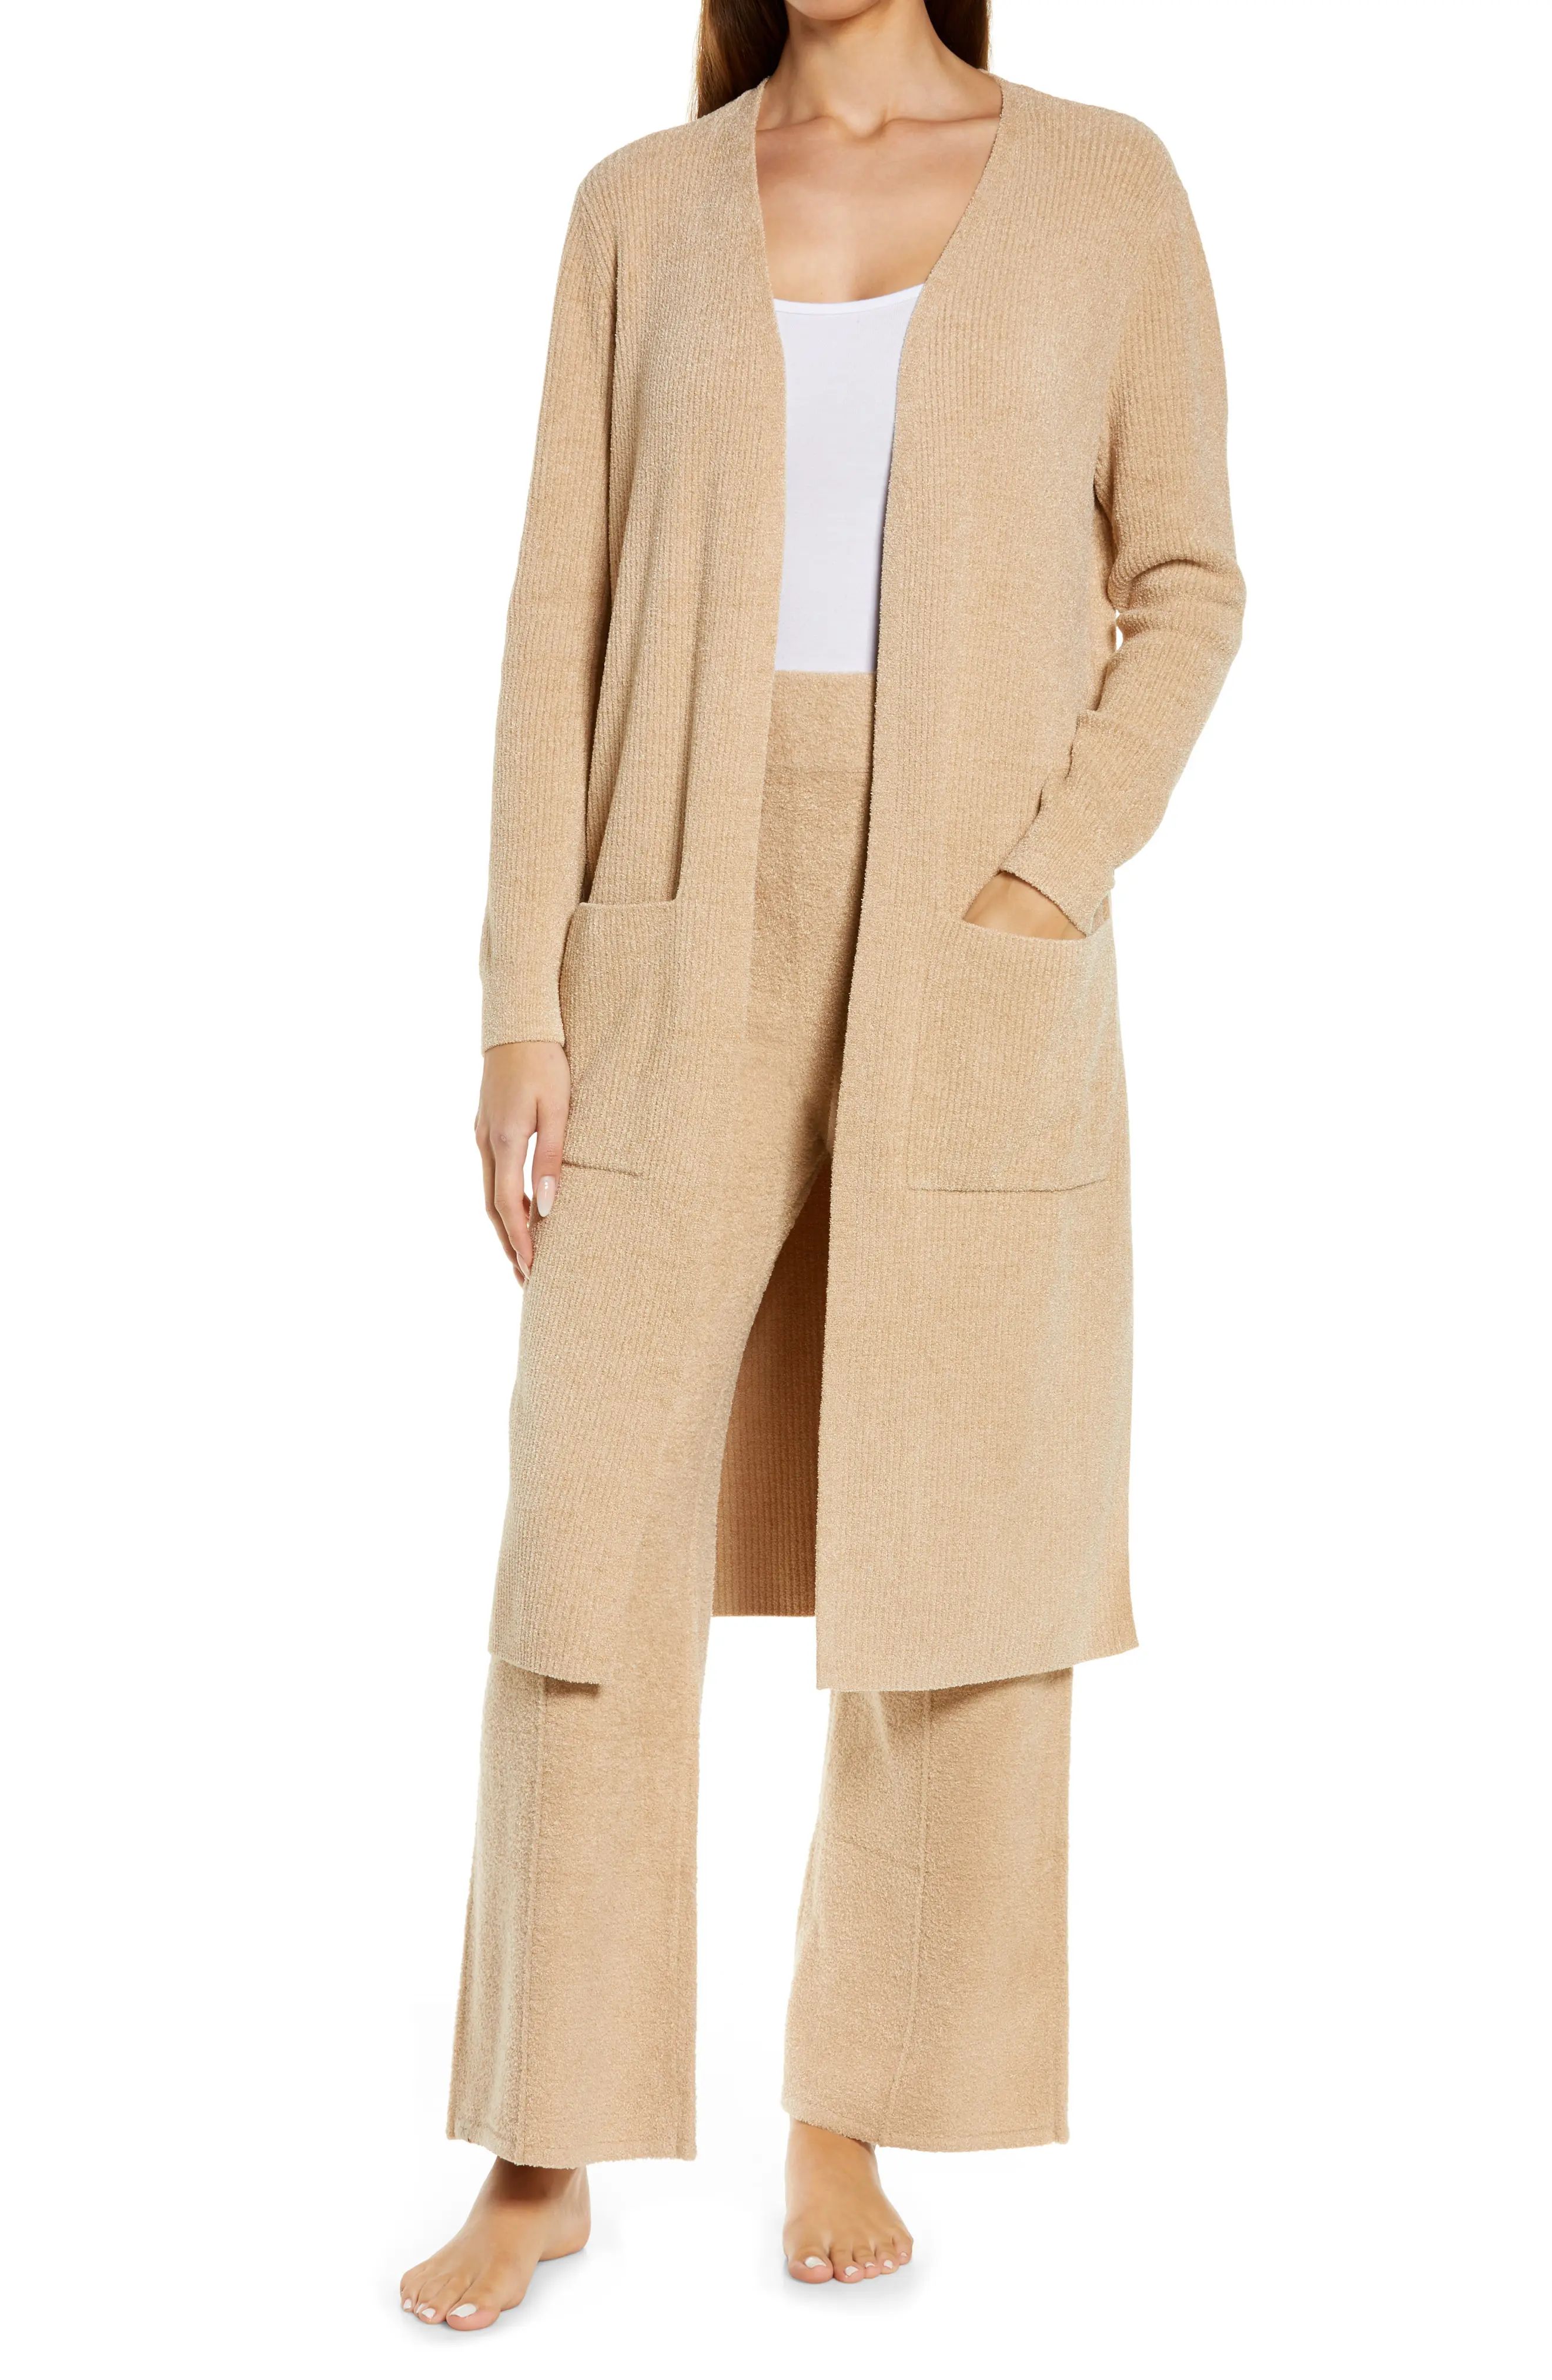 Barefoot Dreams(R) CozyChic Lite(TM) Long Cardigan, Size X-Large in Soft Camel at Nordstrom | Nordstrom